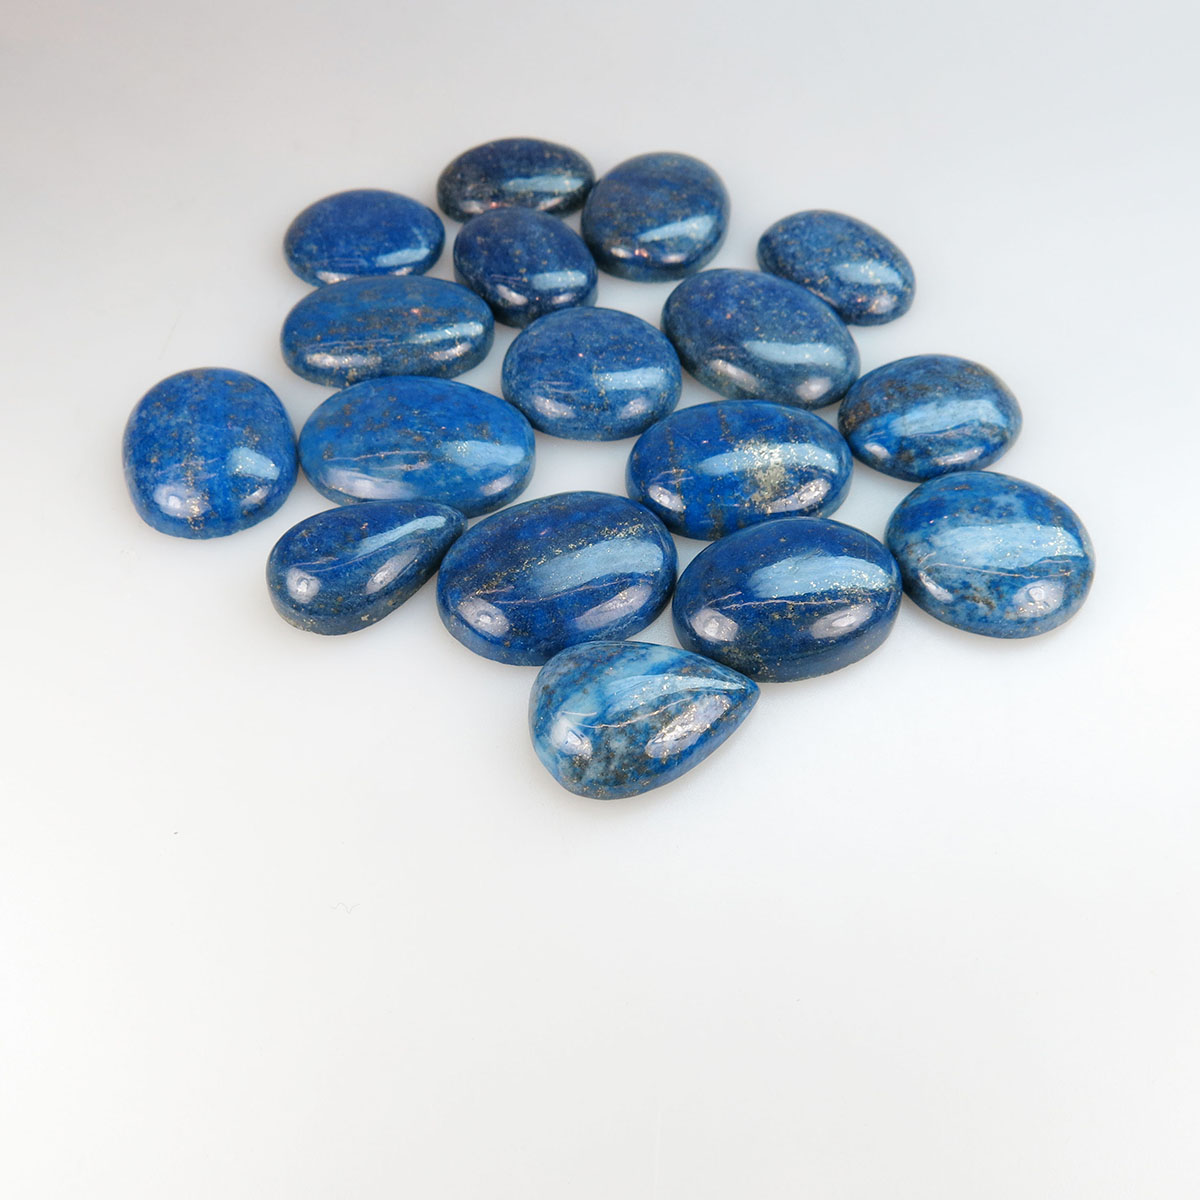 17 Oval and Pear Shaped Lapis Lazuli Cabochons